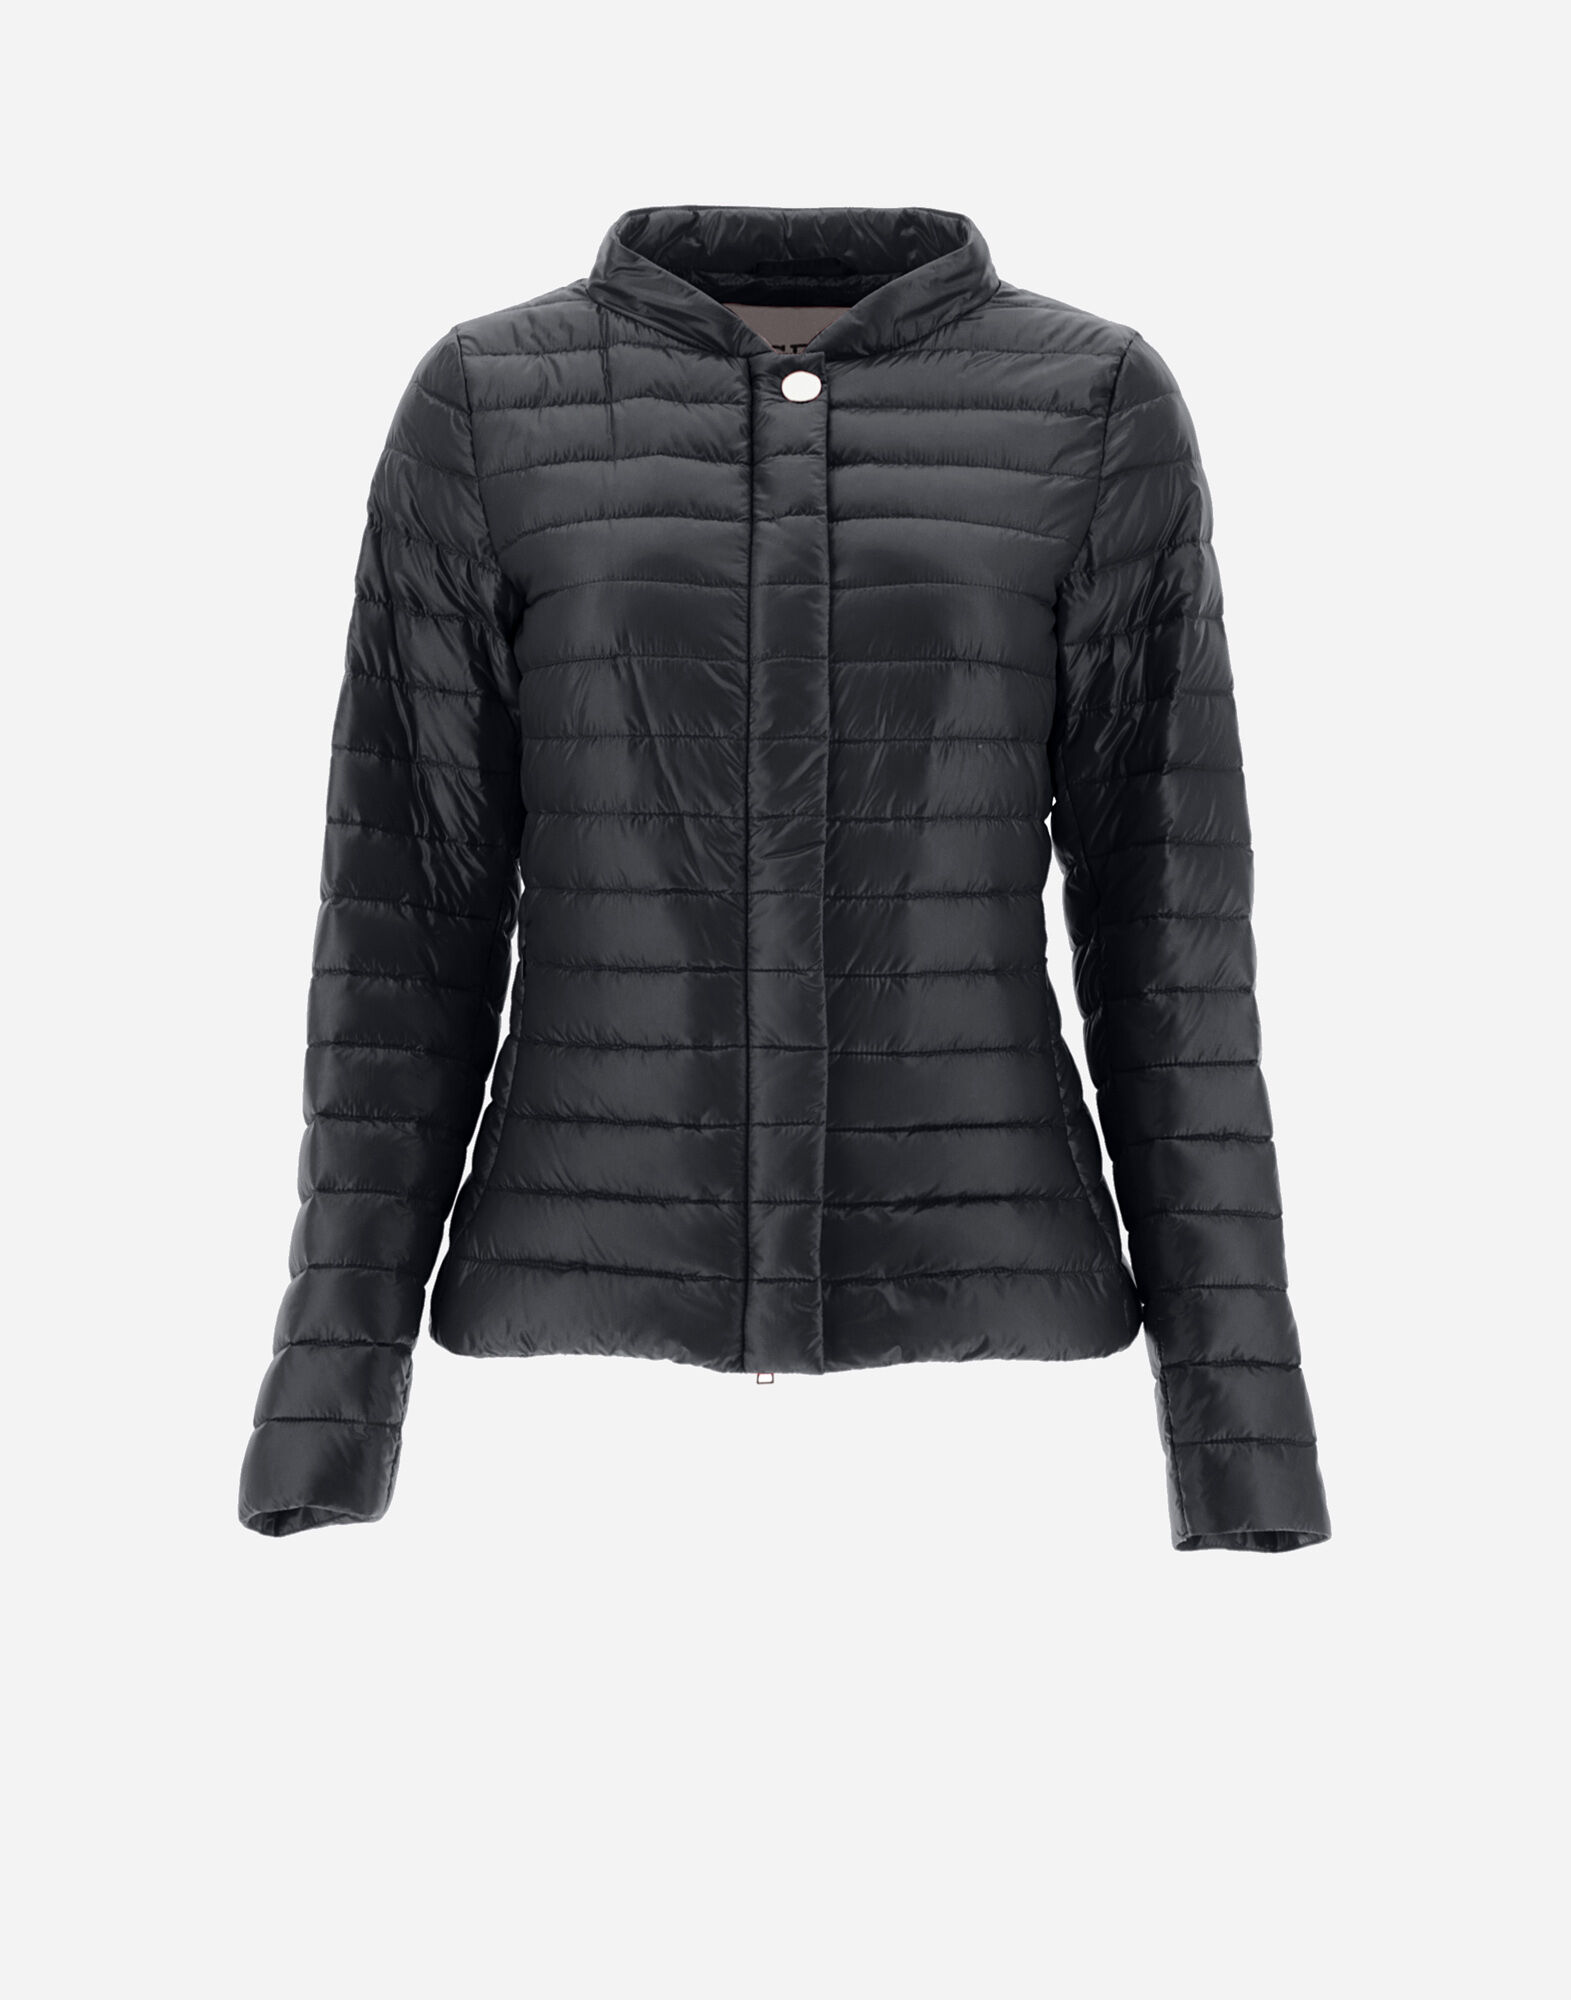 Parka & Jackets for Women | Herno